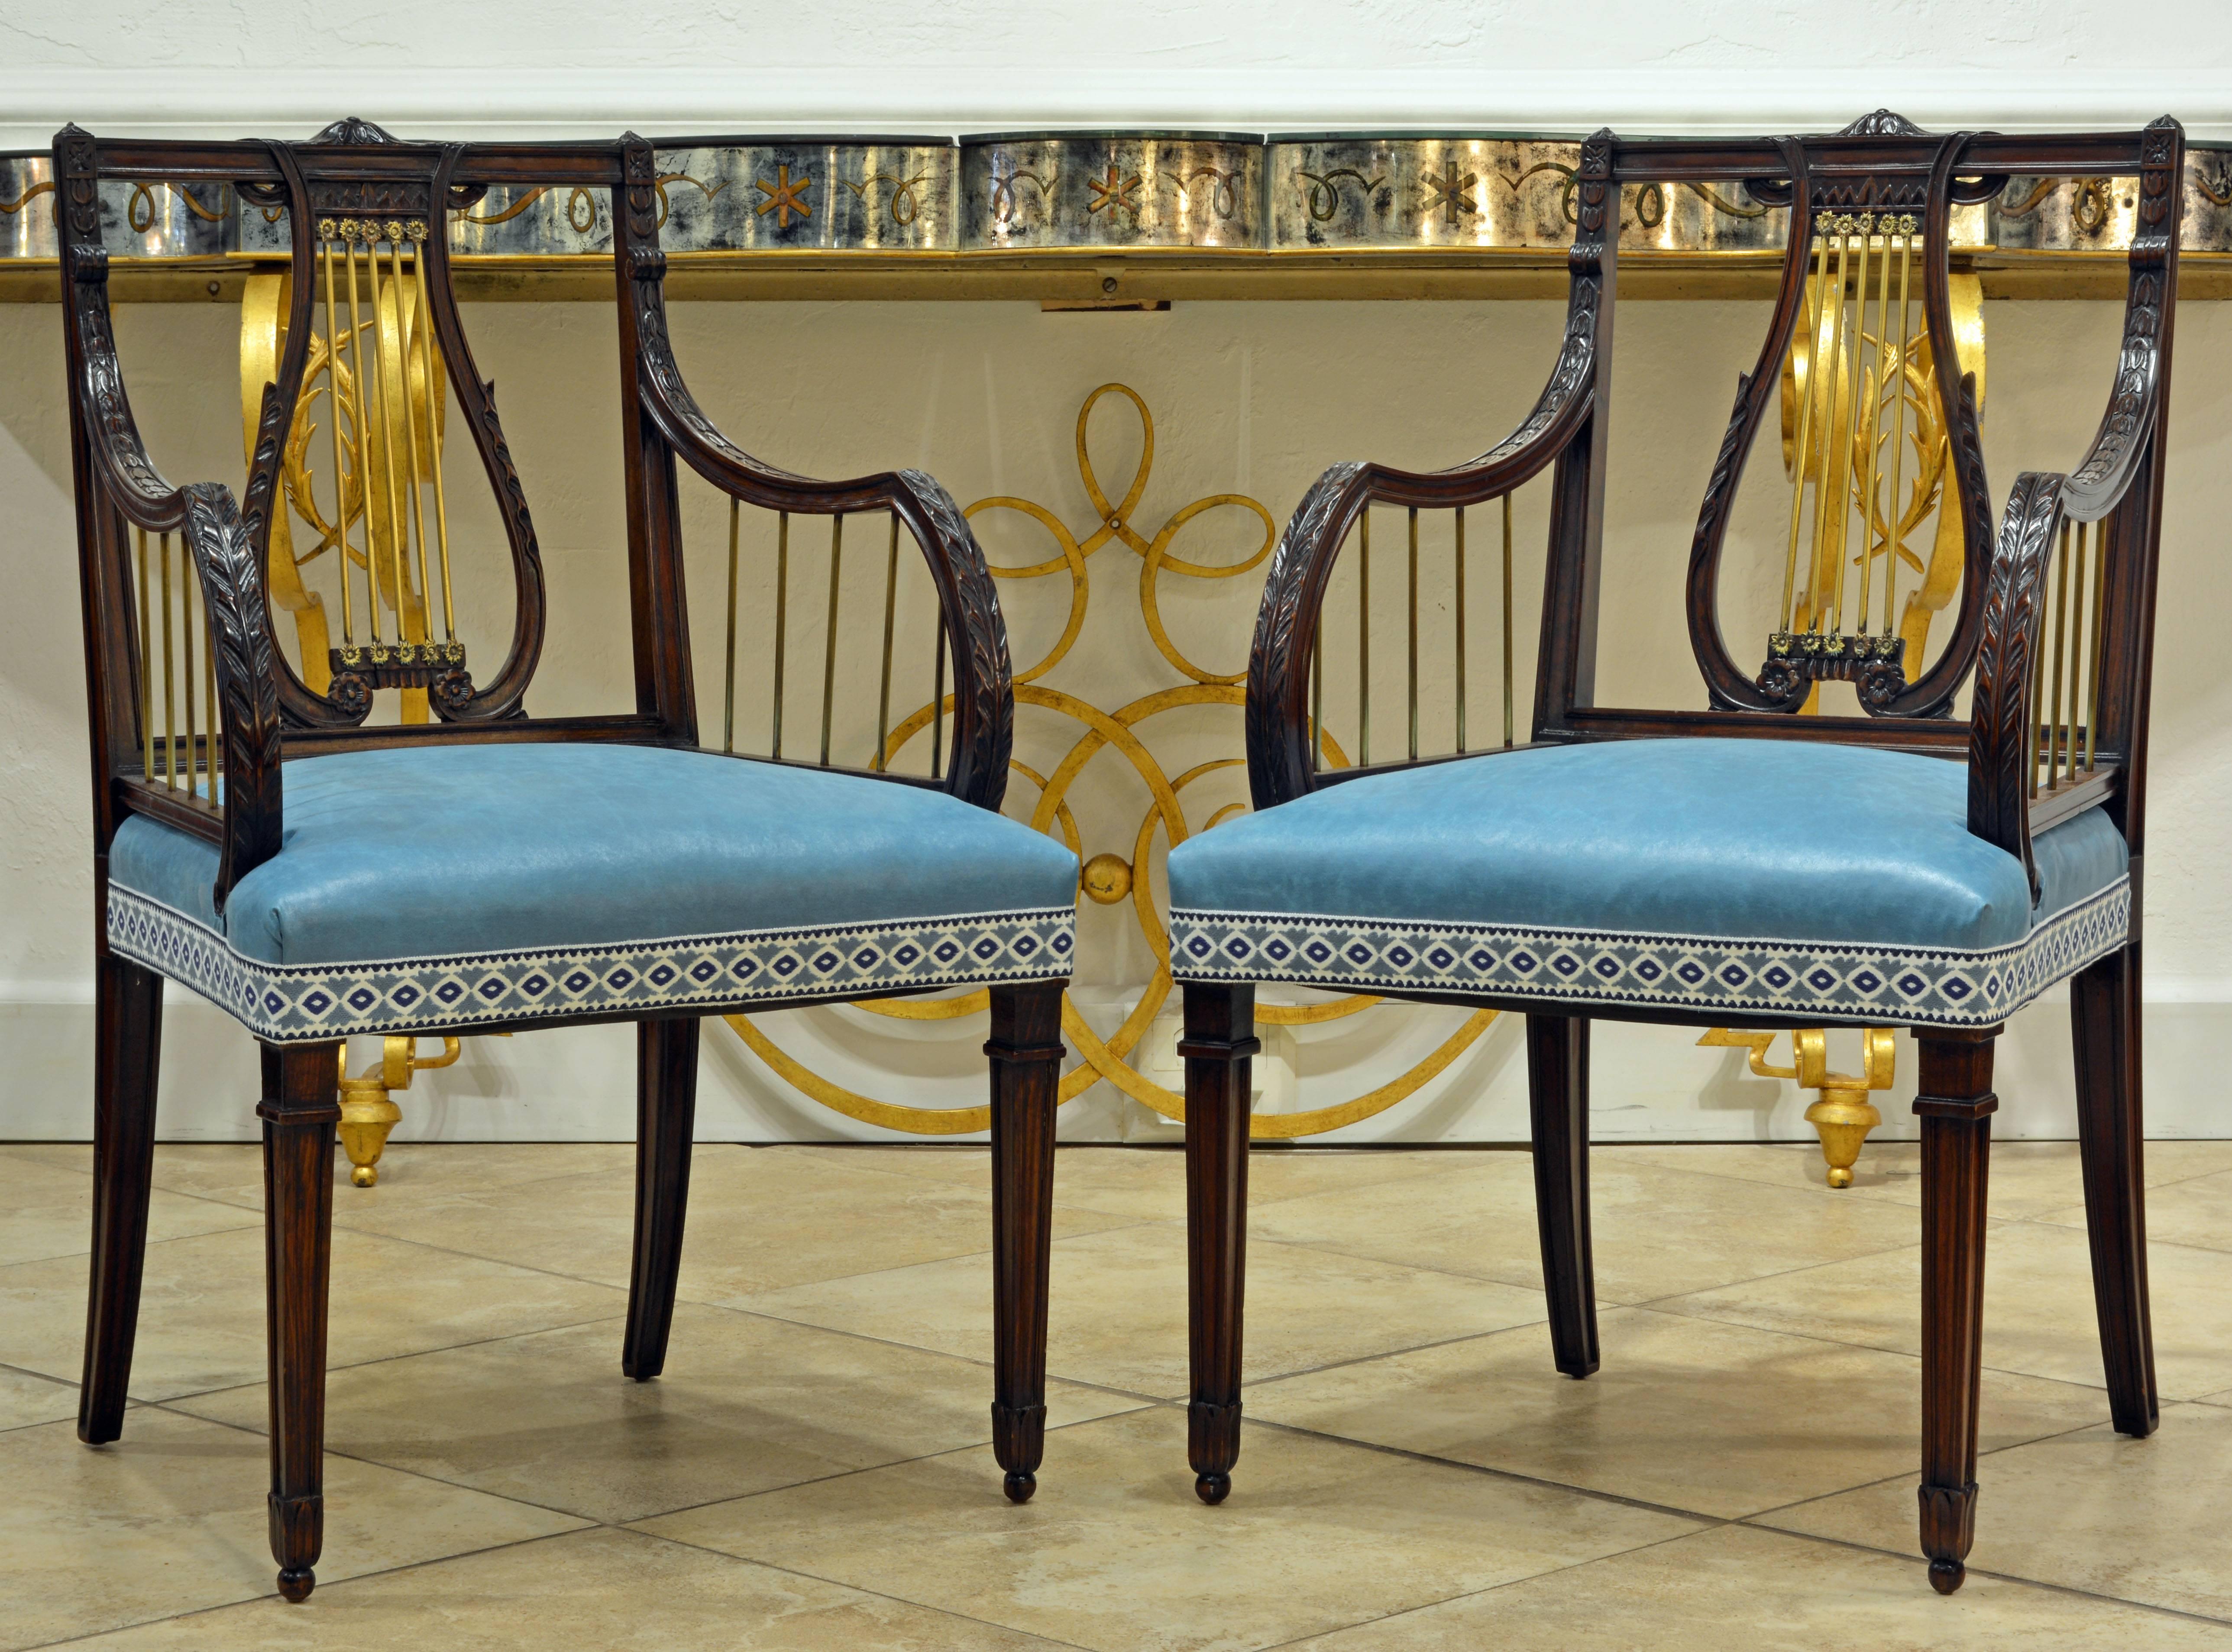 Dating to the late 19th century this elegant pair of Regency style armchairs features a carved mahogany frame with bronze accents in the lyre style on back and armrests. They are attractively covered with pristine light blue chintz and trim.